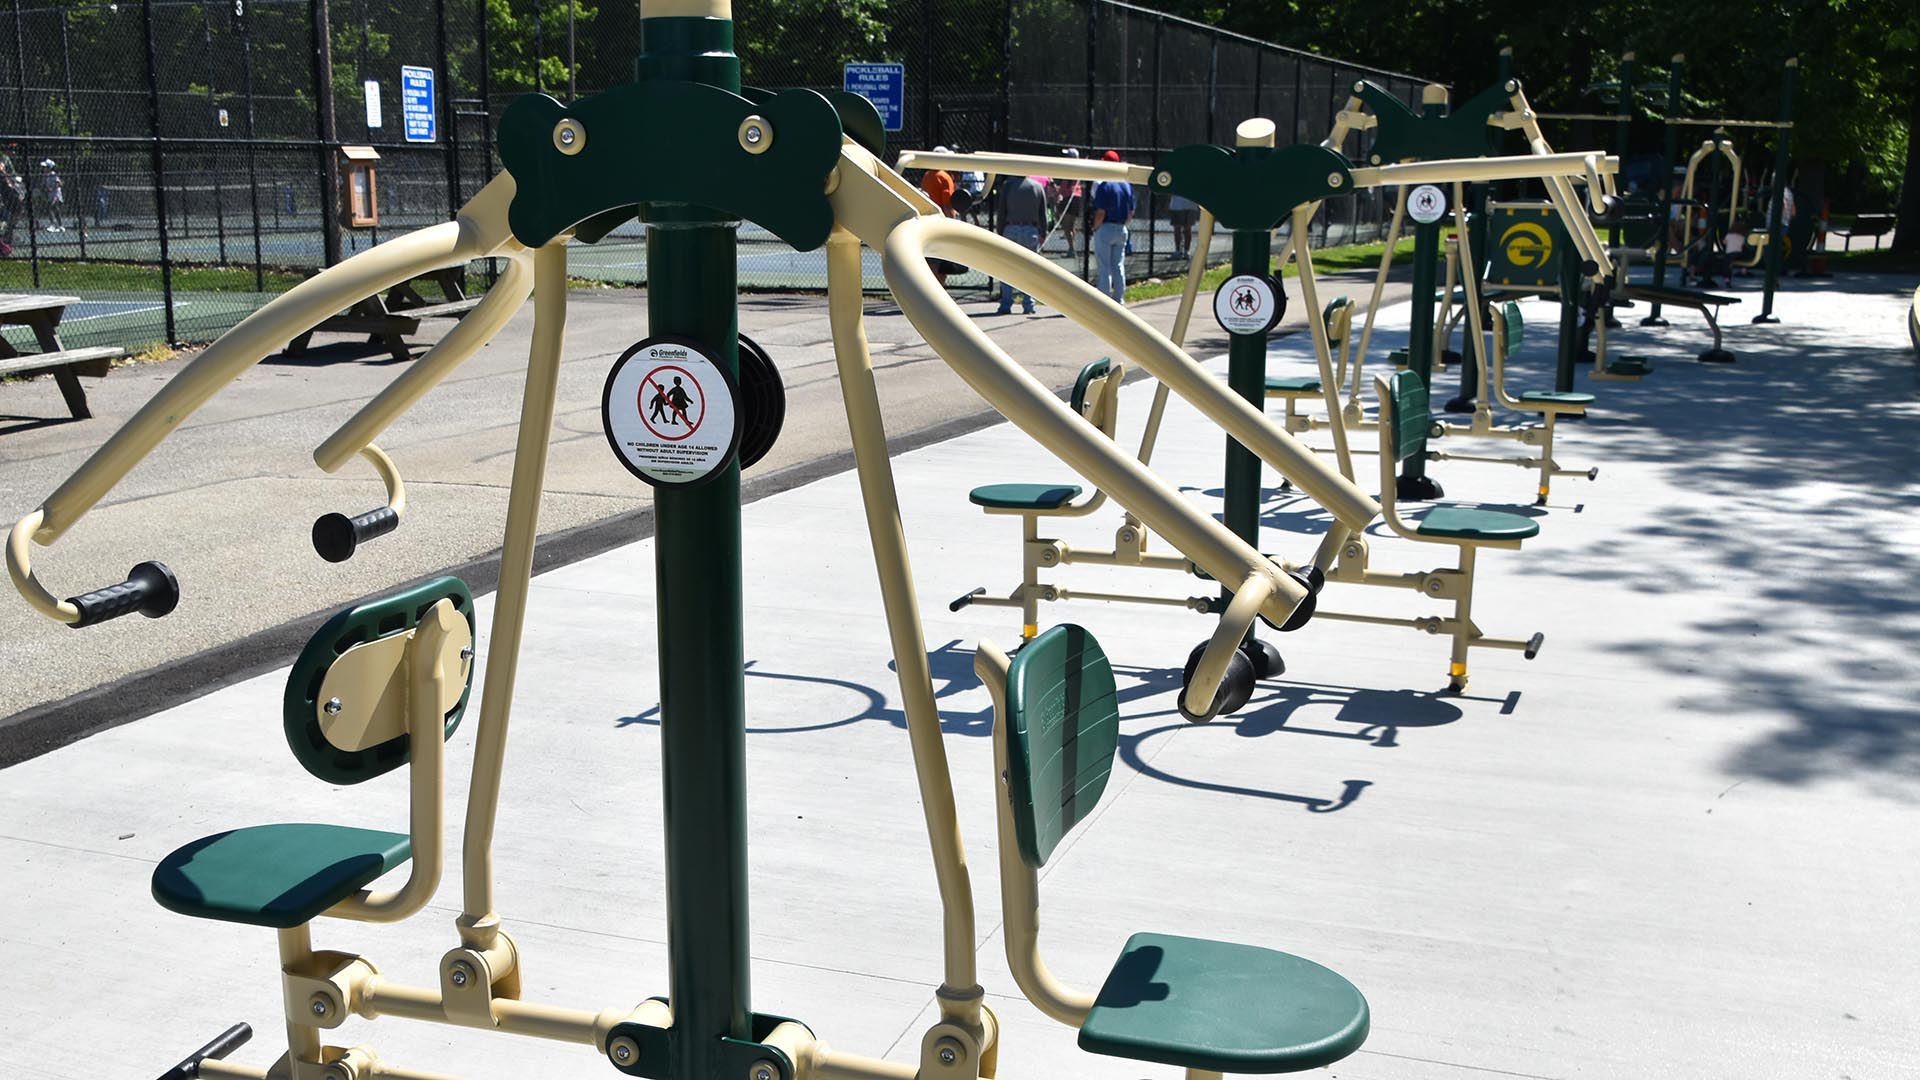 New Outdoor Exercise Stations at Civic Center Park - City of Mentor, Ohio